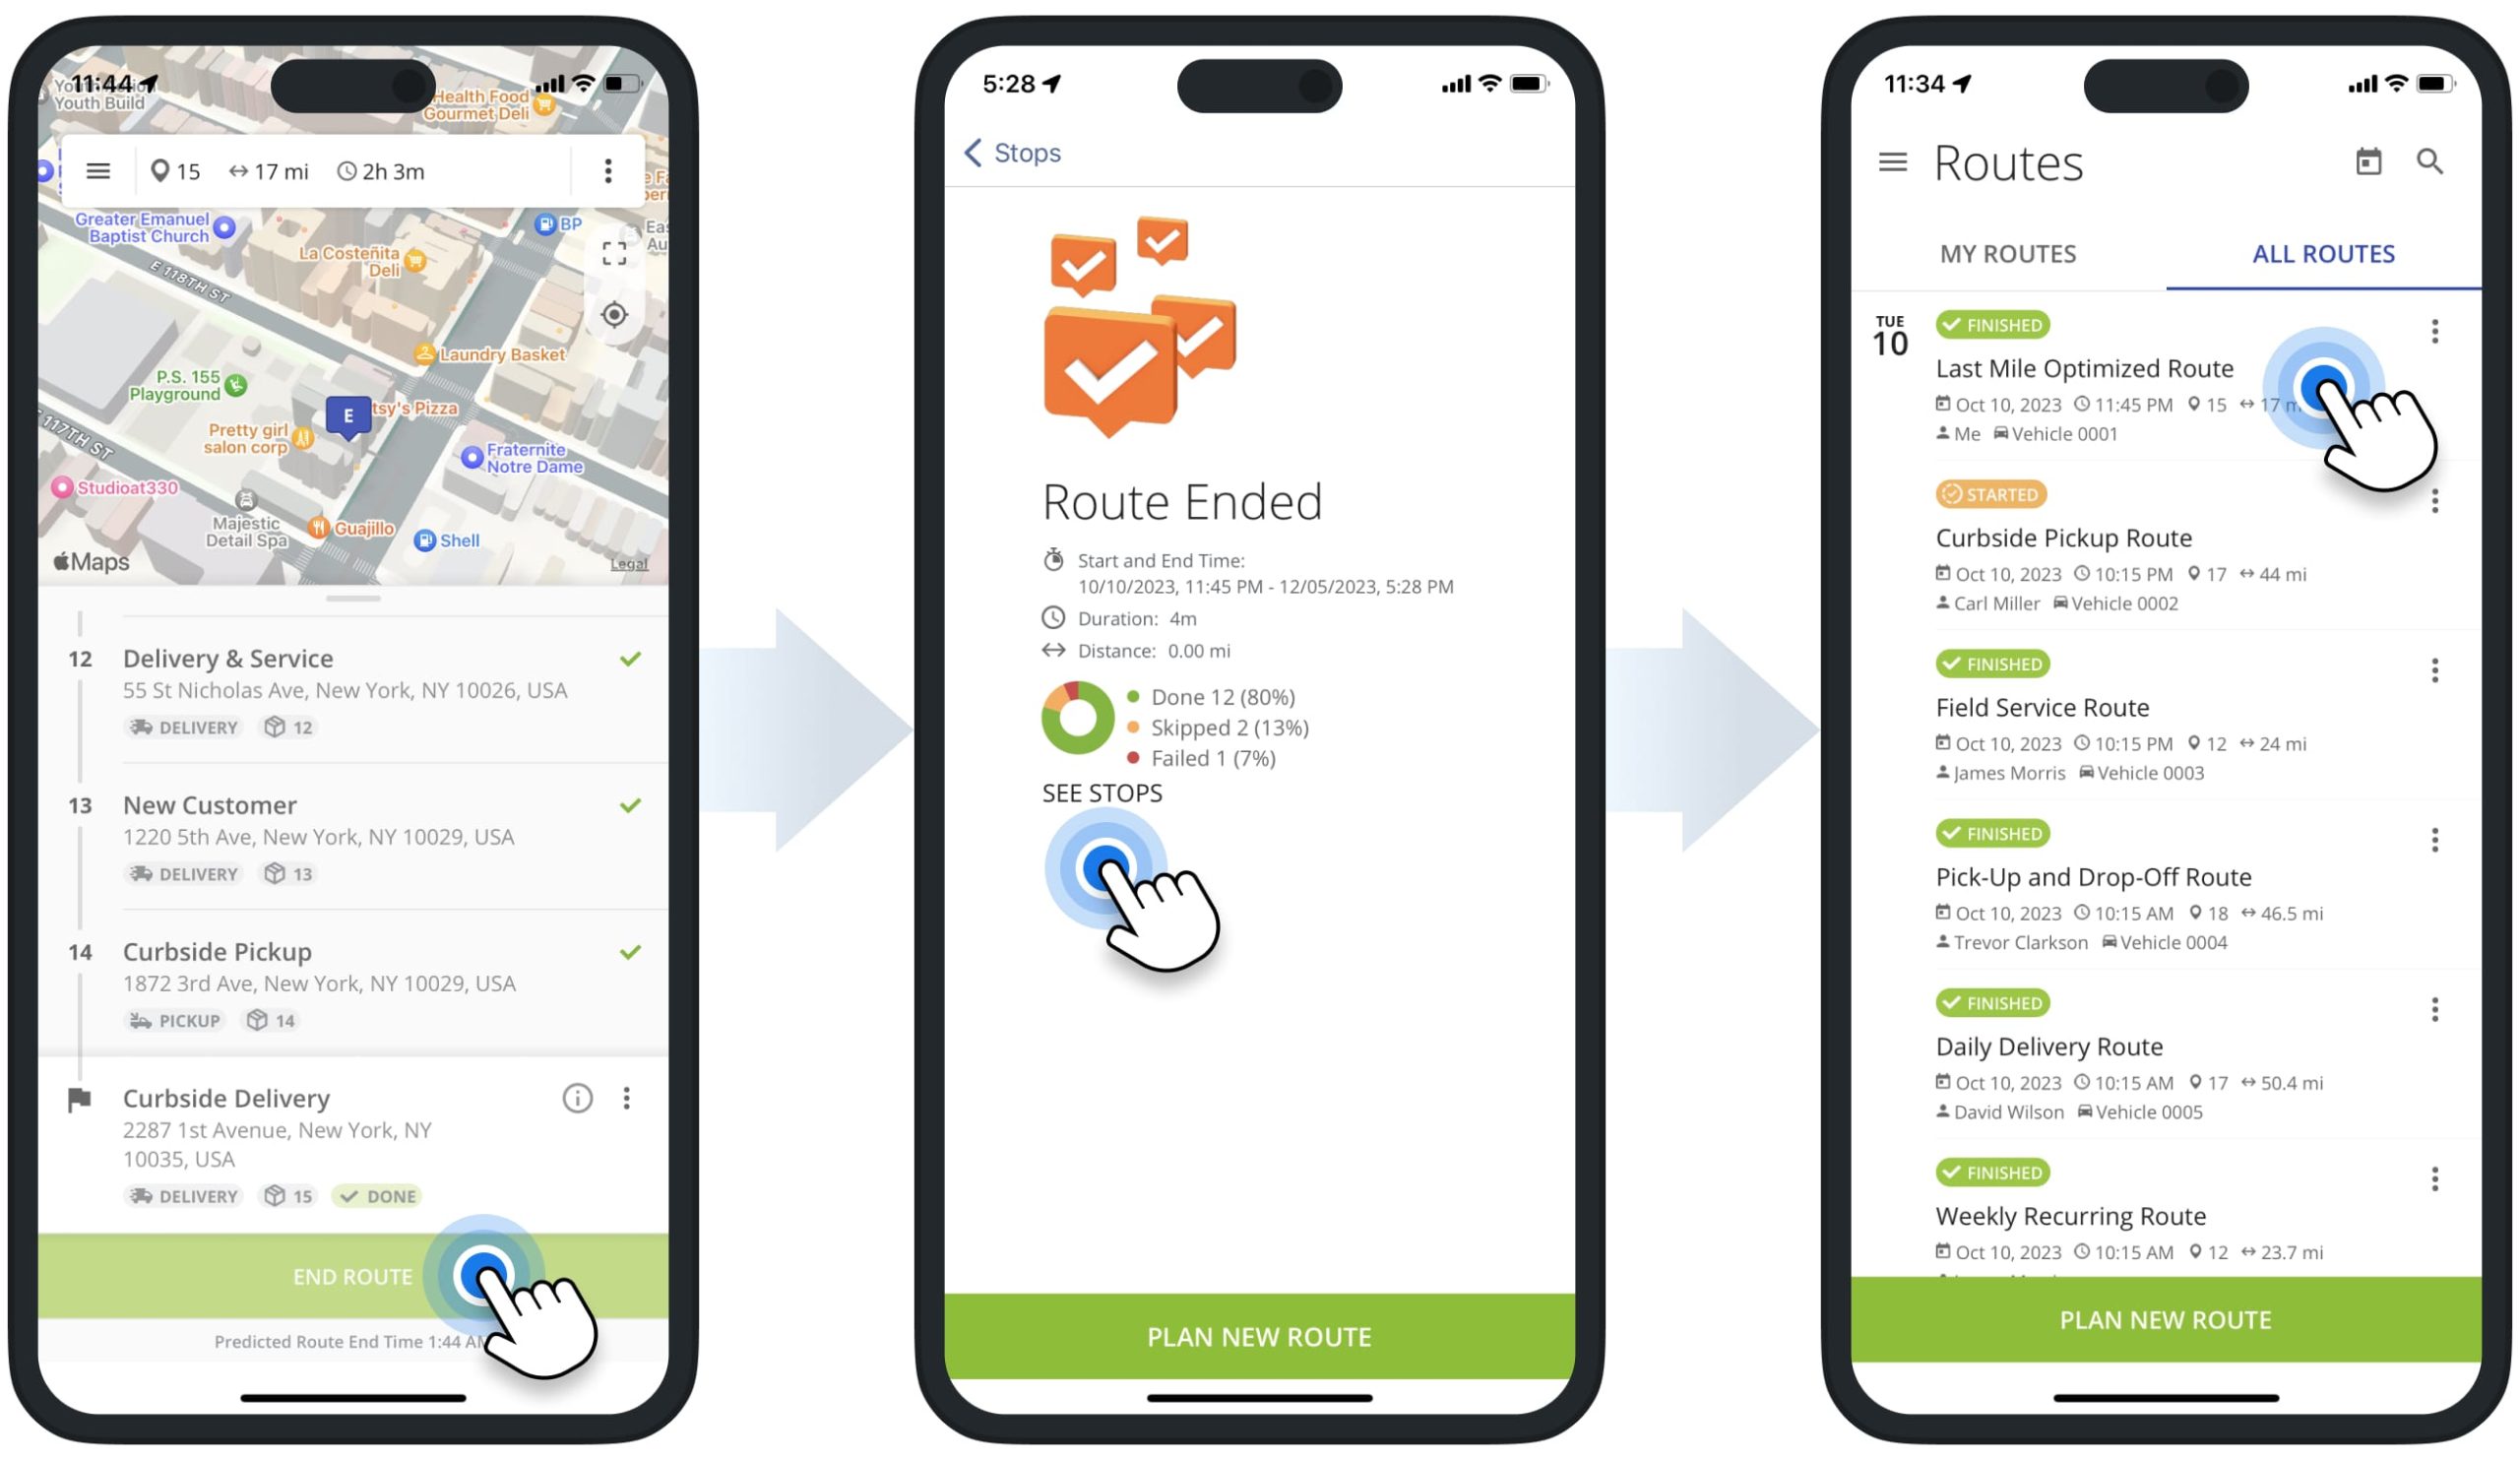 Completing routes and checking route KPIs with statistics, visited stops, traveled distance, and time on Route4Me's iPhone Route Optimization app.